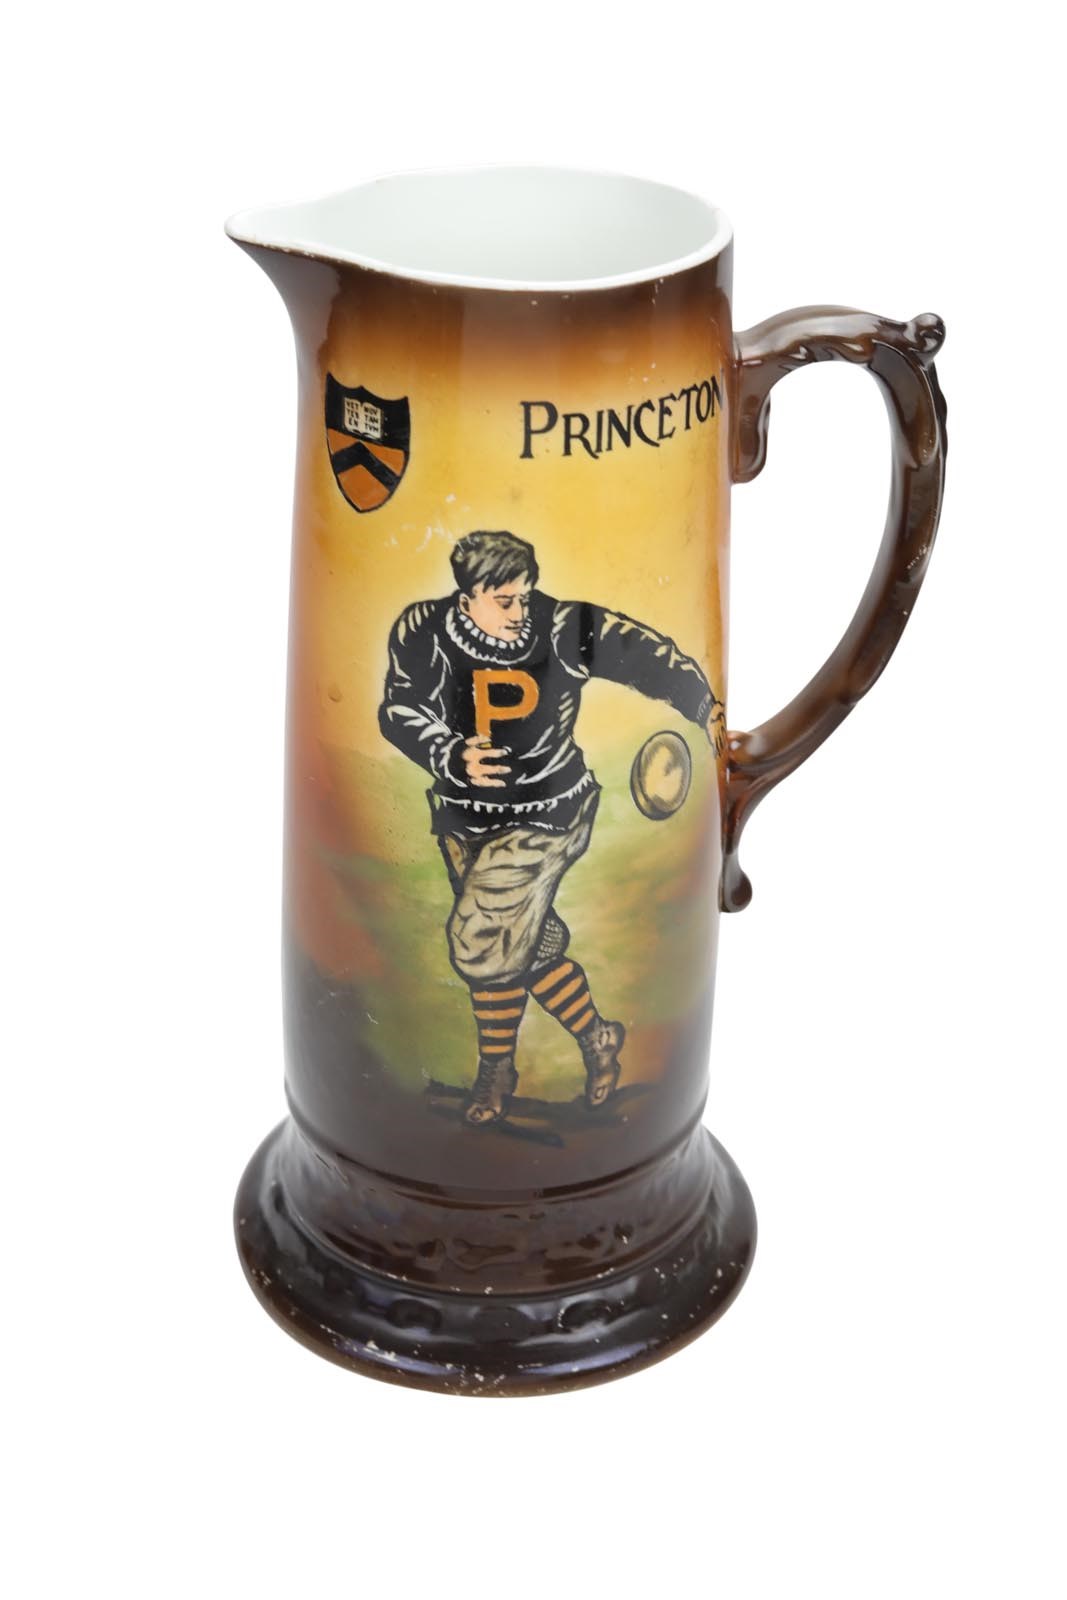 - Early 1900's Princeton Football Large Stein